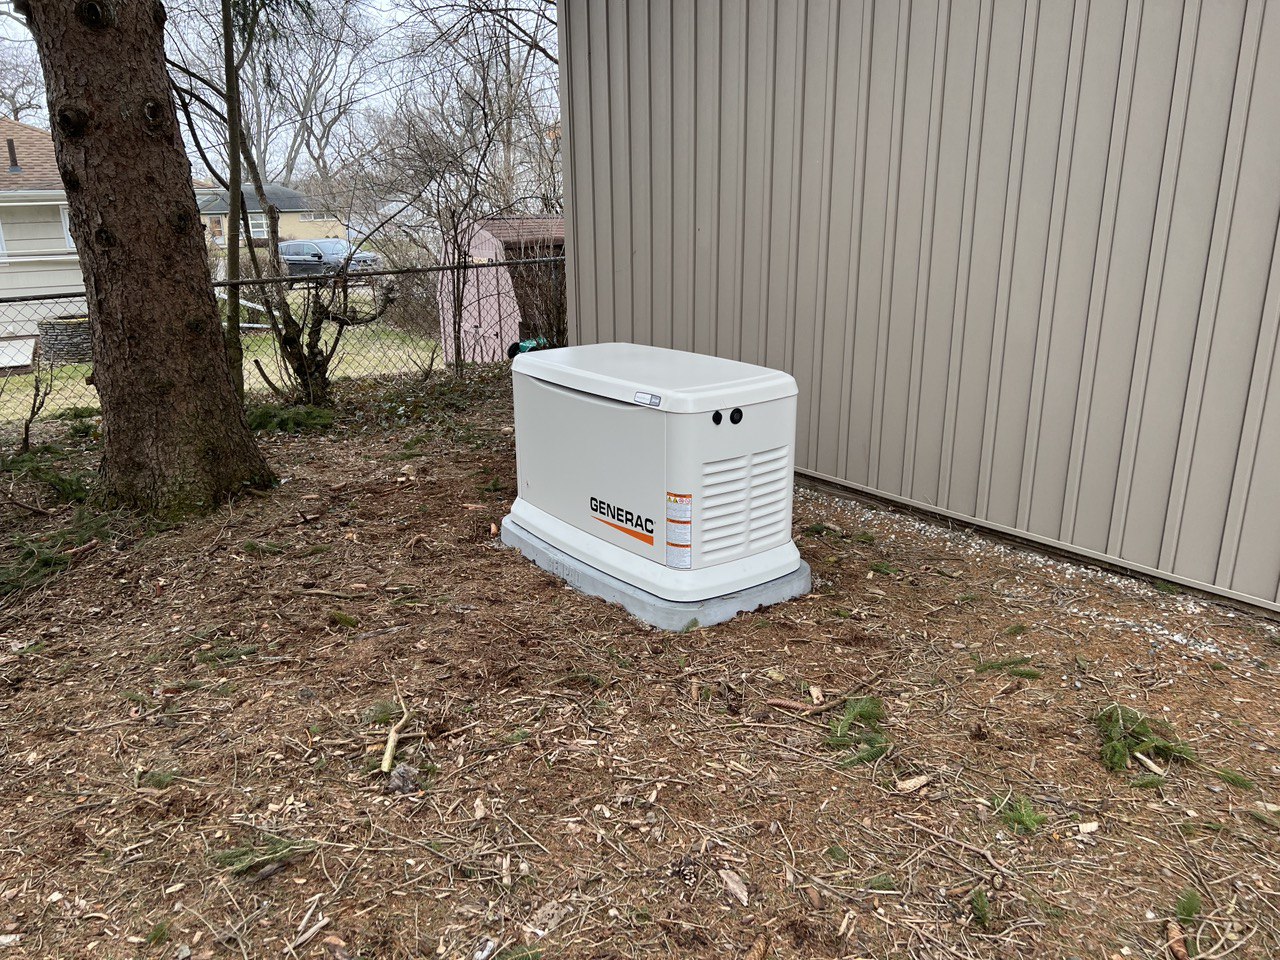 Generac Guardian 26kw generator sitting on a concrete pad next to a tan shed under a pine tree